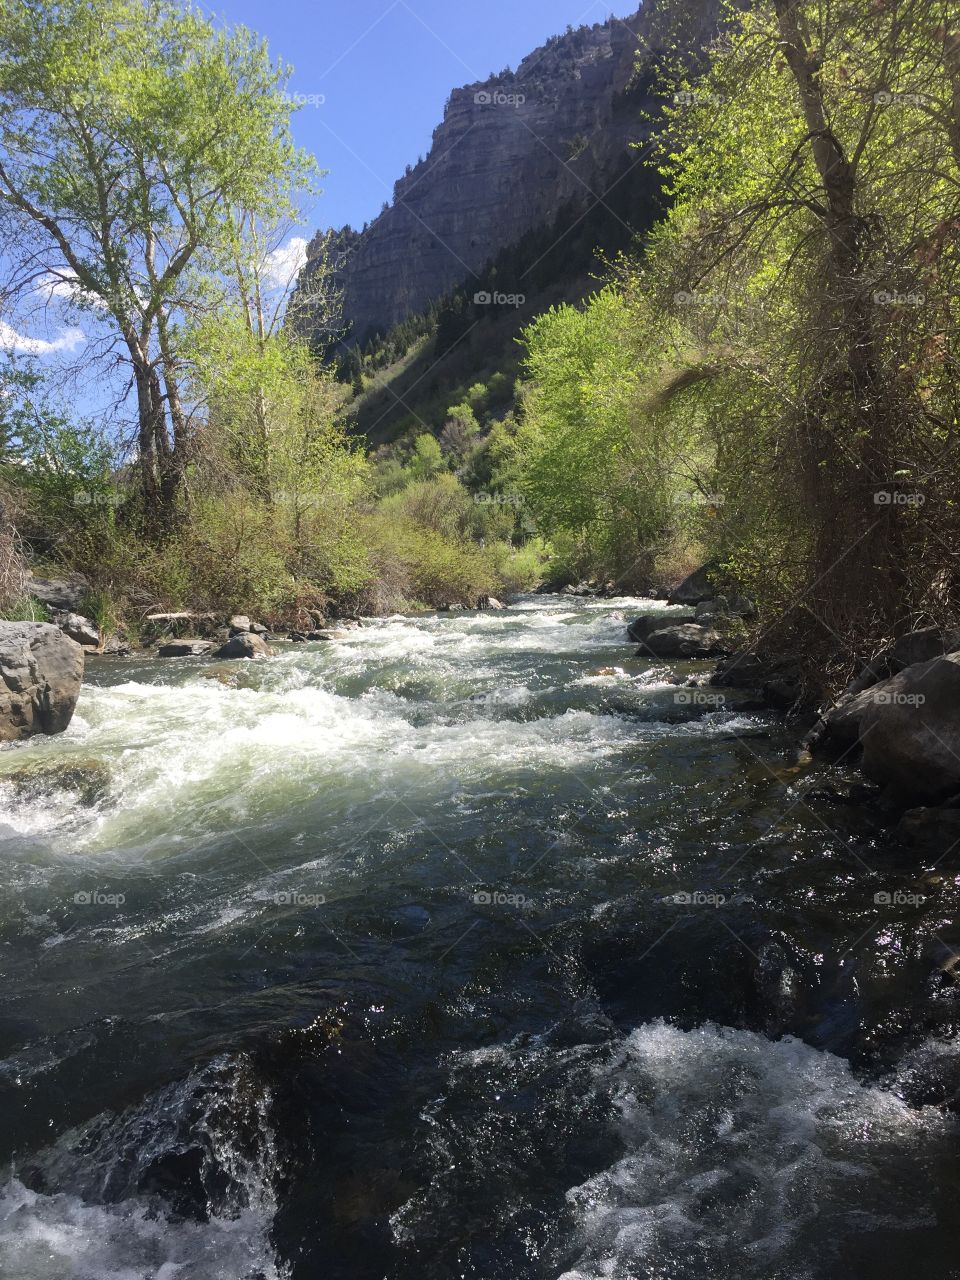 A spring on the trail to Bridal Falls in Springville, Utah. Beautifully clear snowmelt water surrounded by Utah in bloom. April 2018.